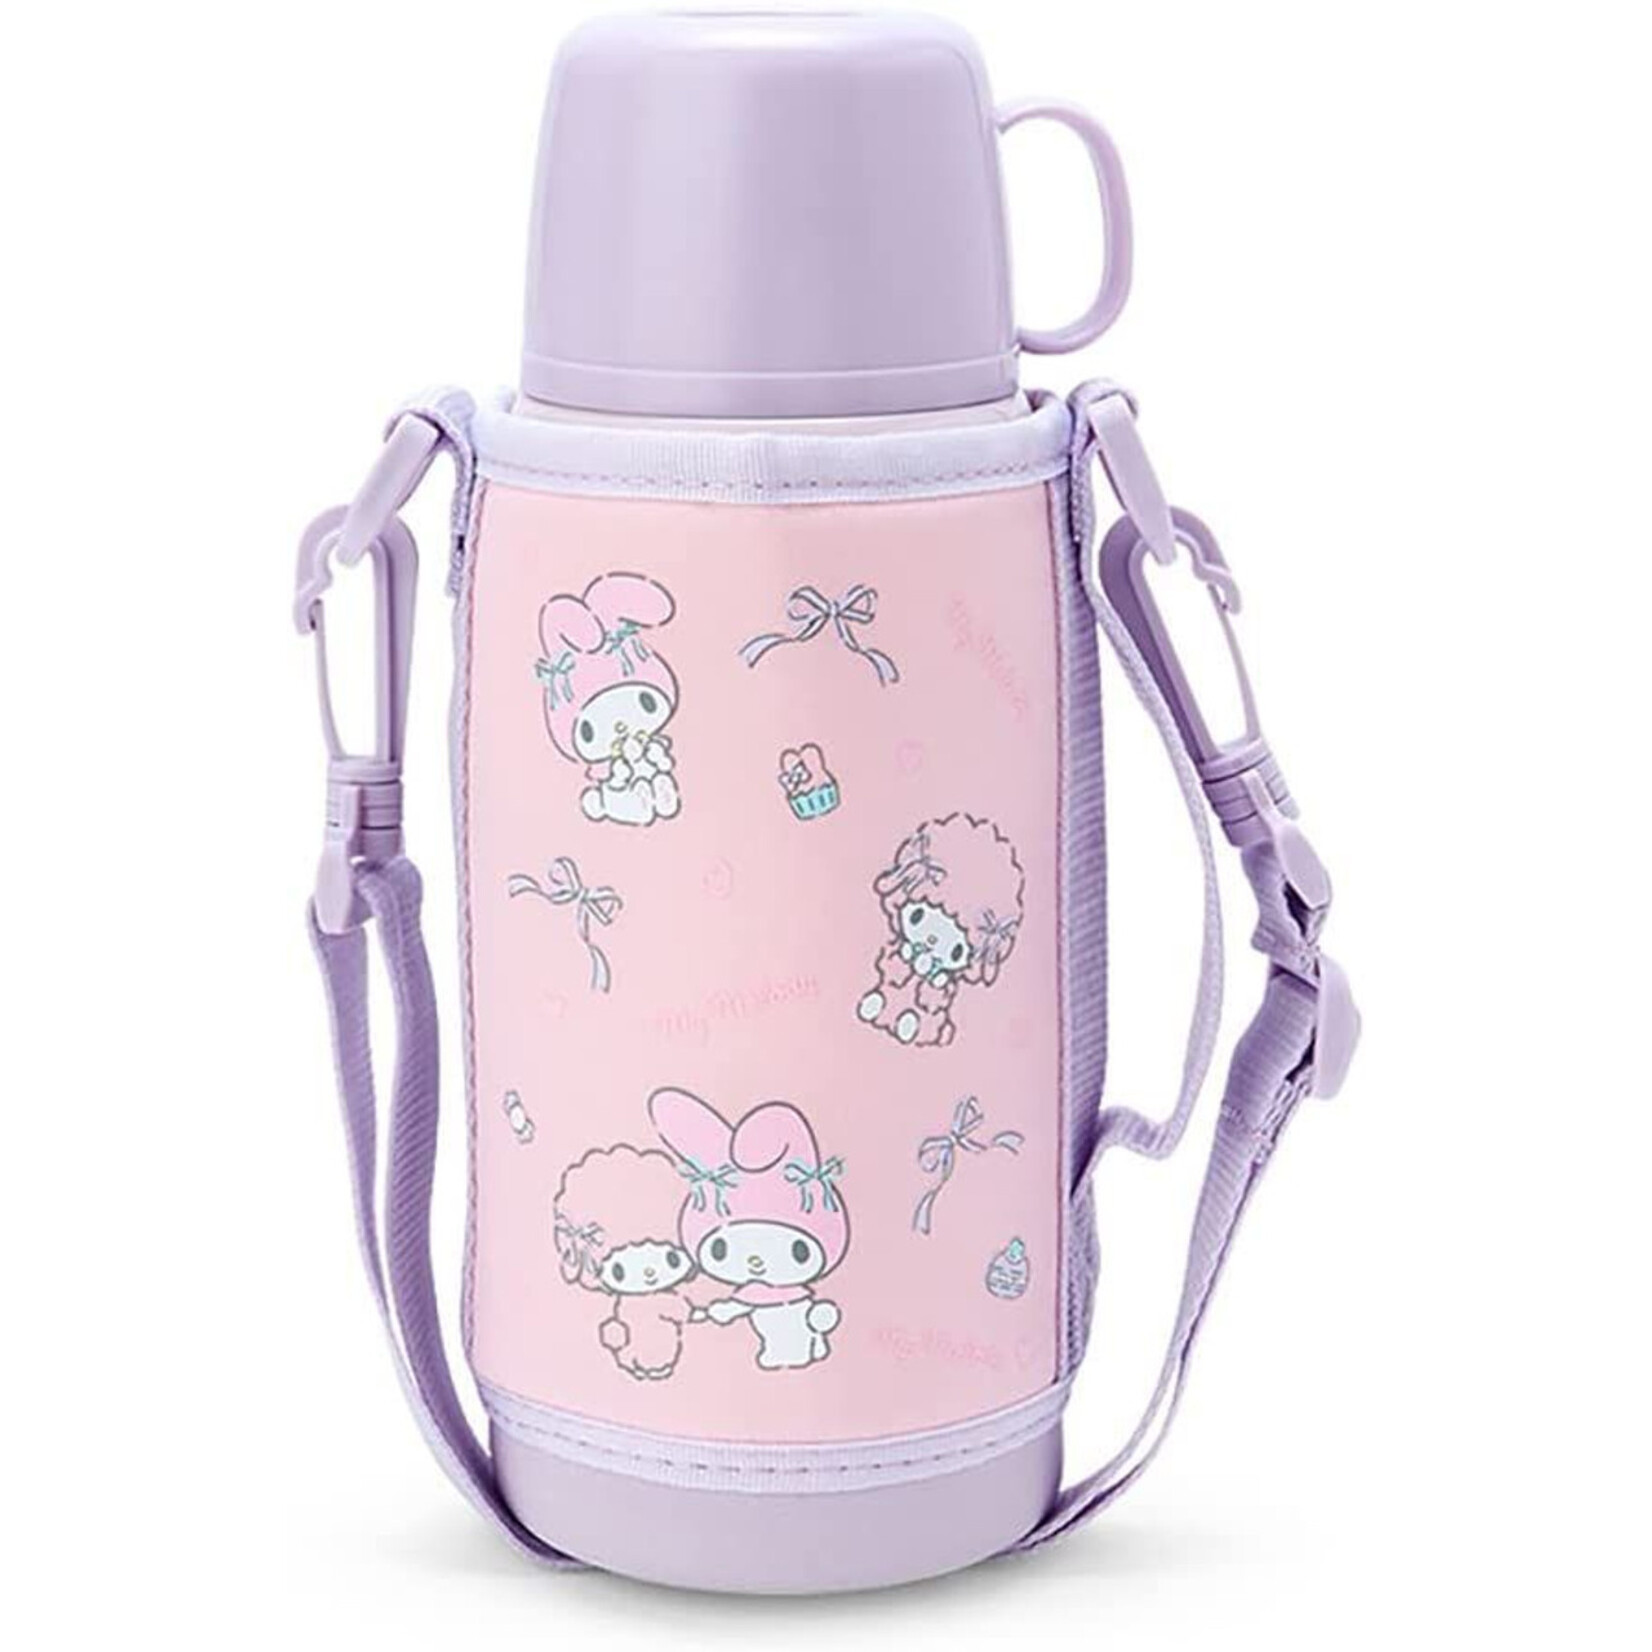 Sanrio My Melody 2-Way Stainless Steel Water Bottle